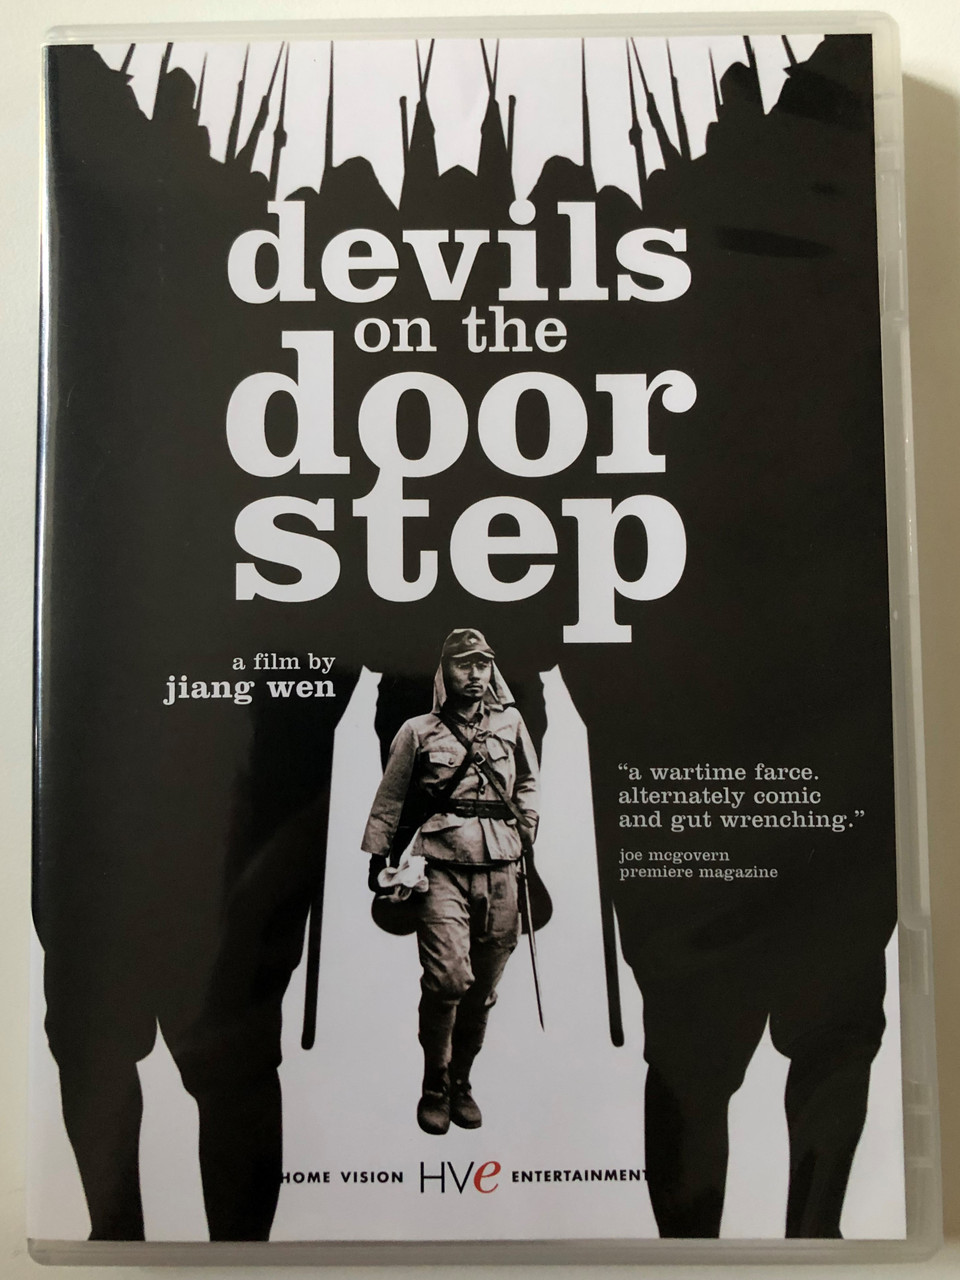 Devils on the Doorstep - a film by Jiang Wen / Home Vision Entertainment DVD  Video CD 2005 / DEV 050 - bibleinmylanguage